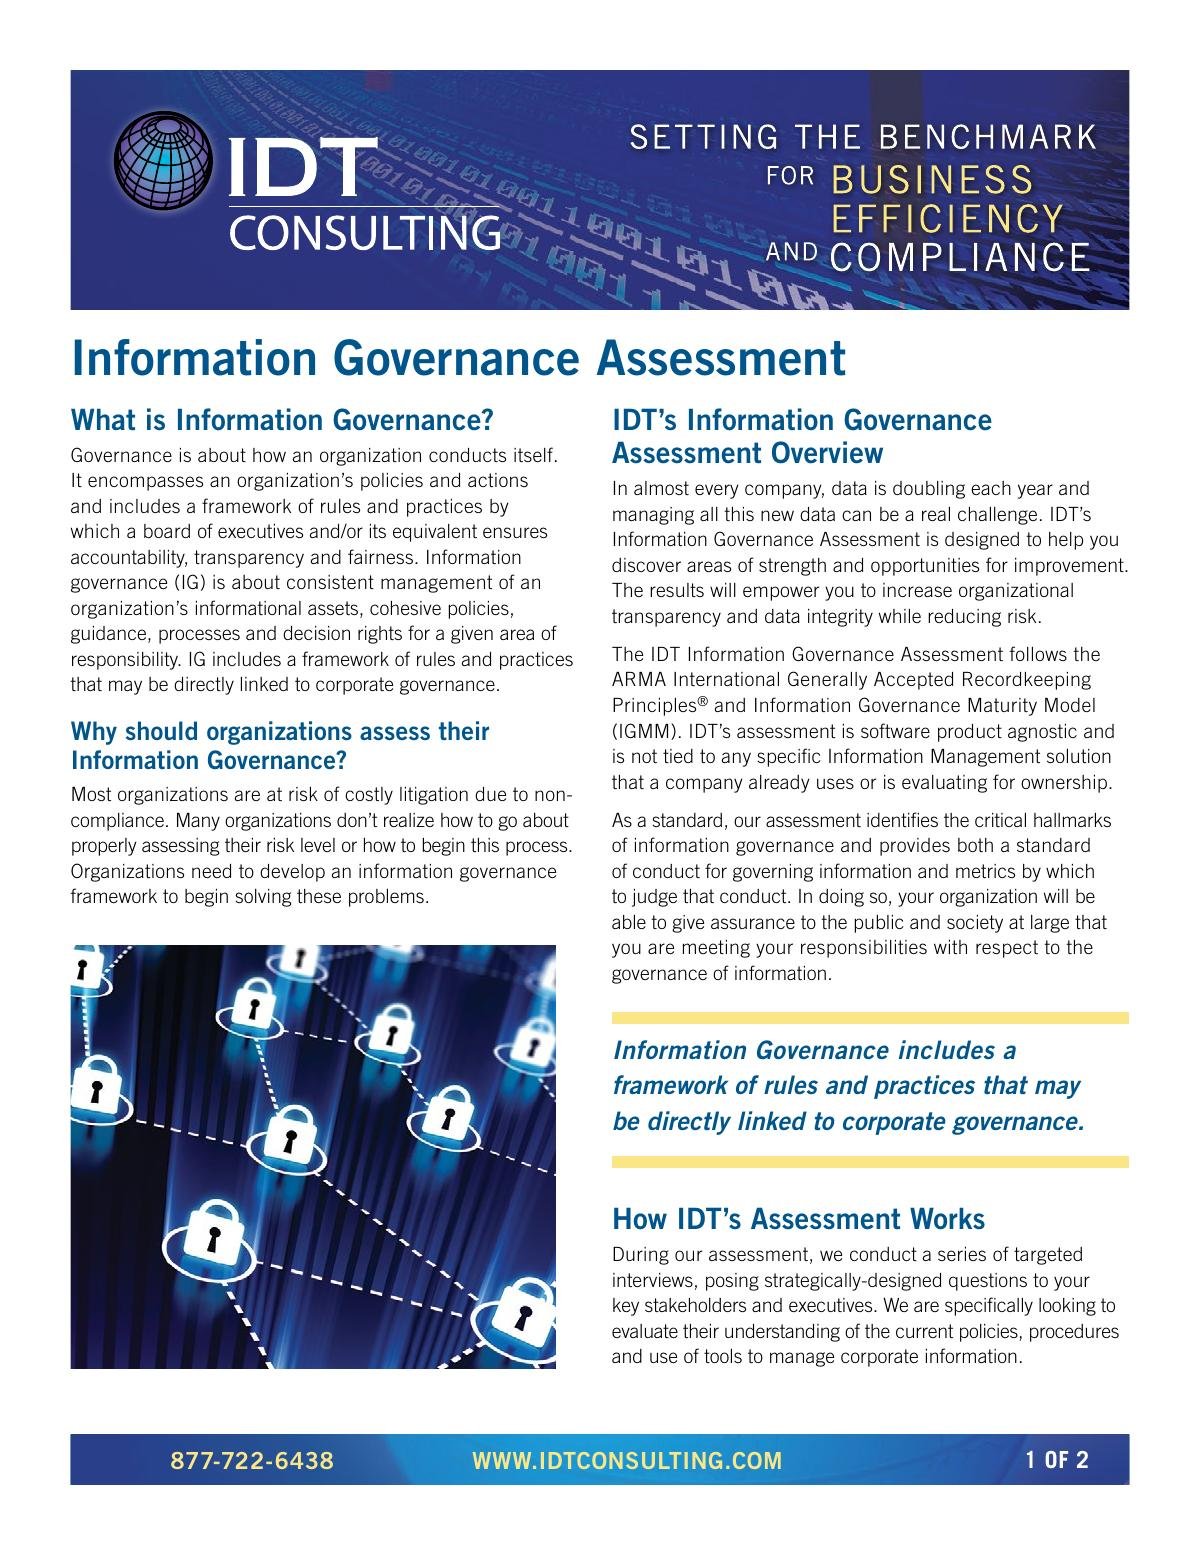 Information Governance - How Will Your Company Stand Up in Court? 